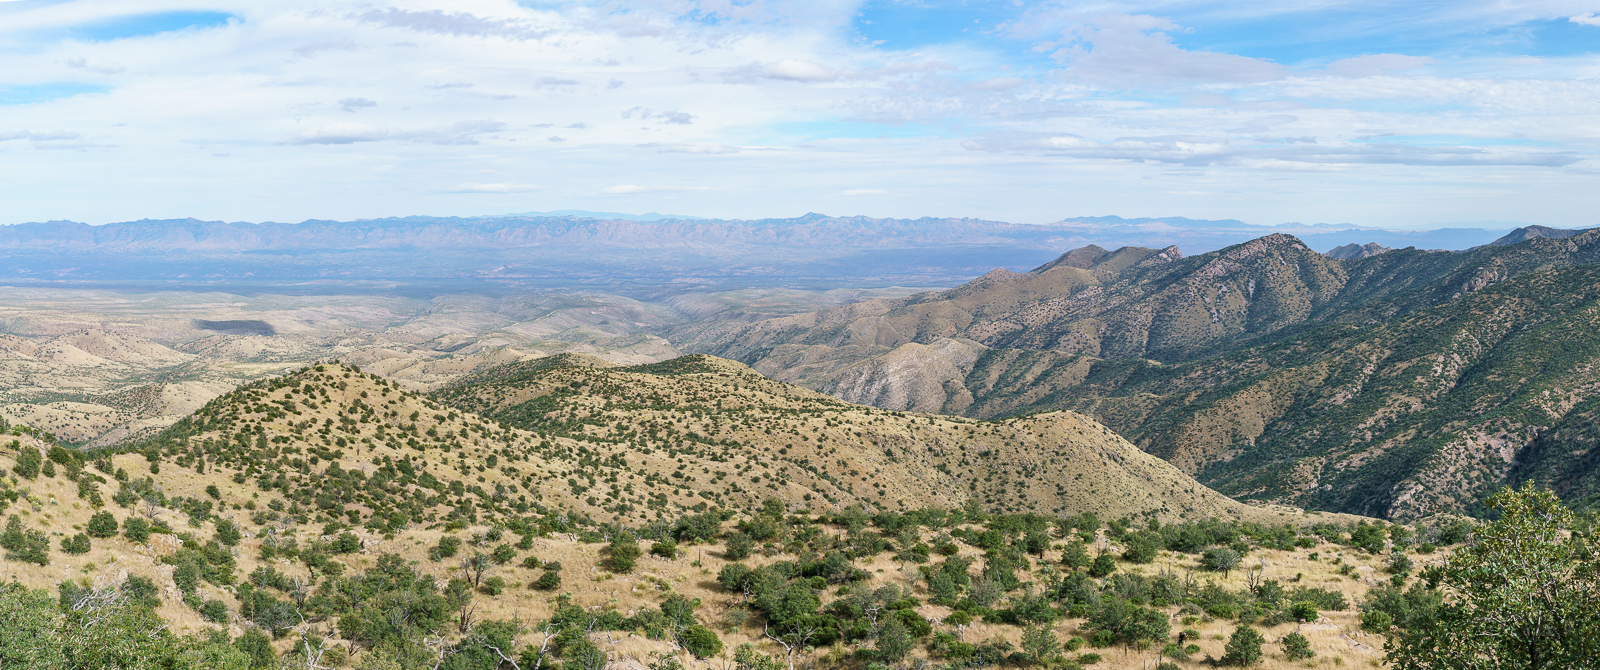 Looking down the mountain into the San Pedro River Valley from Lombar Hill - Alder Canyon and the ridge between Alder and Edgar Canyons are on the right - if you zoom in you can see Black Hills Mine Road and the road to Ventana Windmill descending into Alder Canyon. October 2016.